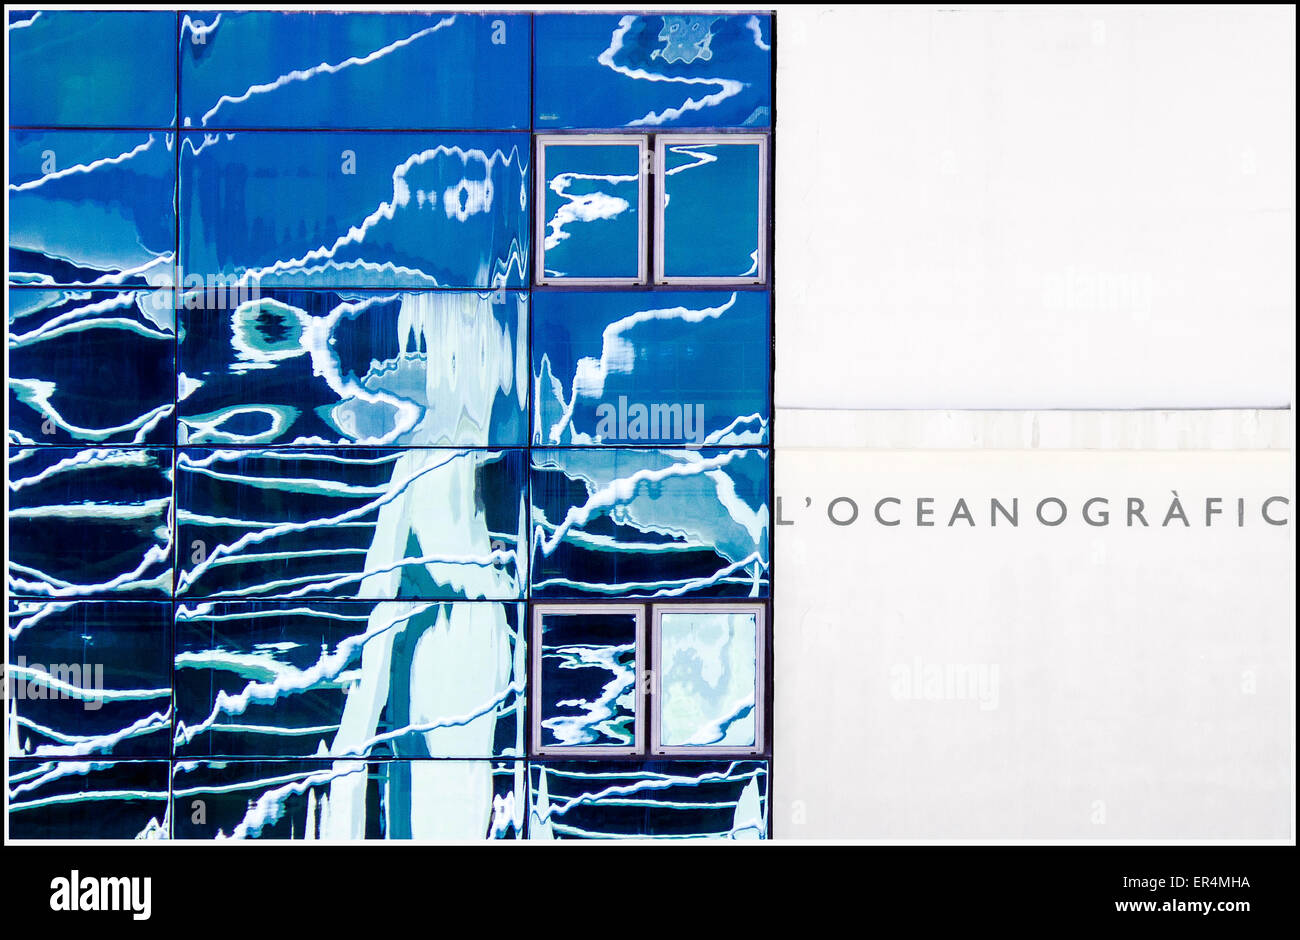 The Oceanografic building in Valencia's Arts and Sciences complex, reflecting its remarkable architectural surroundings Stock Photo